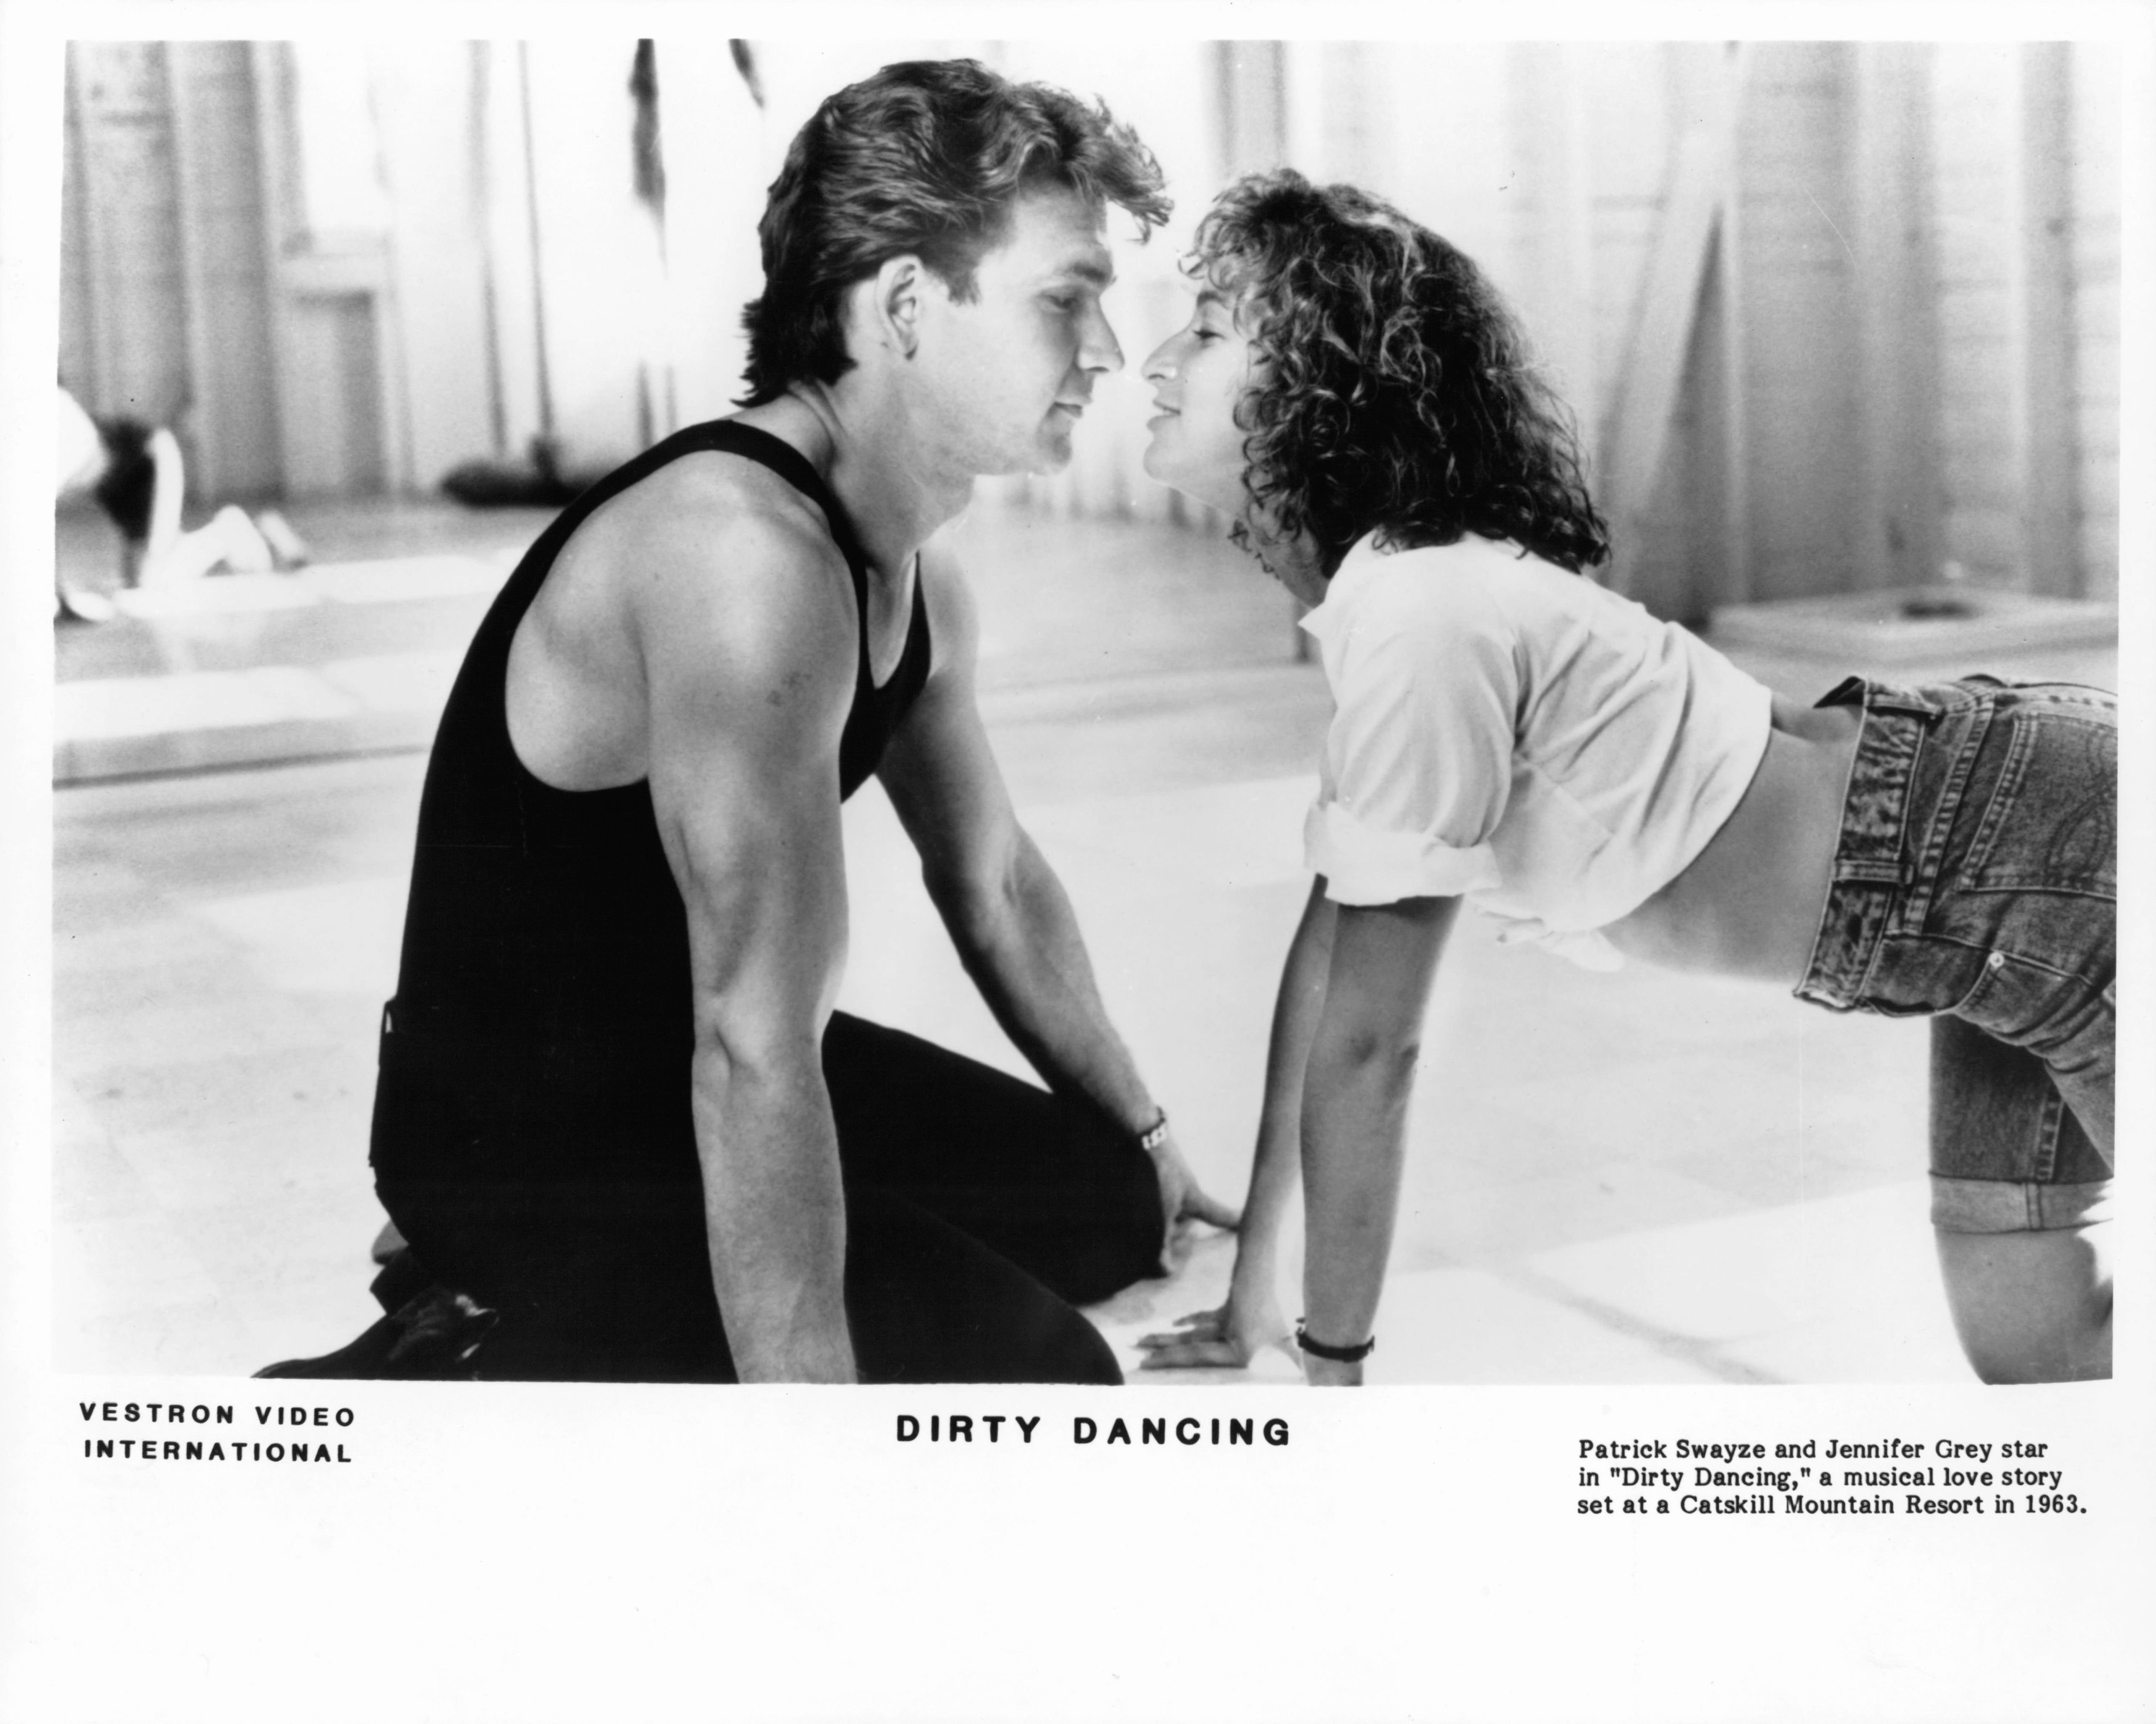 Patrick Swayze as Johnny Castle and Jennifer Grey as Frances "Baby" Houseman during a scene of the iconic 1987 film "Dirty Dancing" | Photo: Vestron/Getty Images